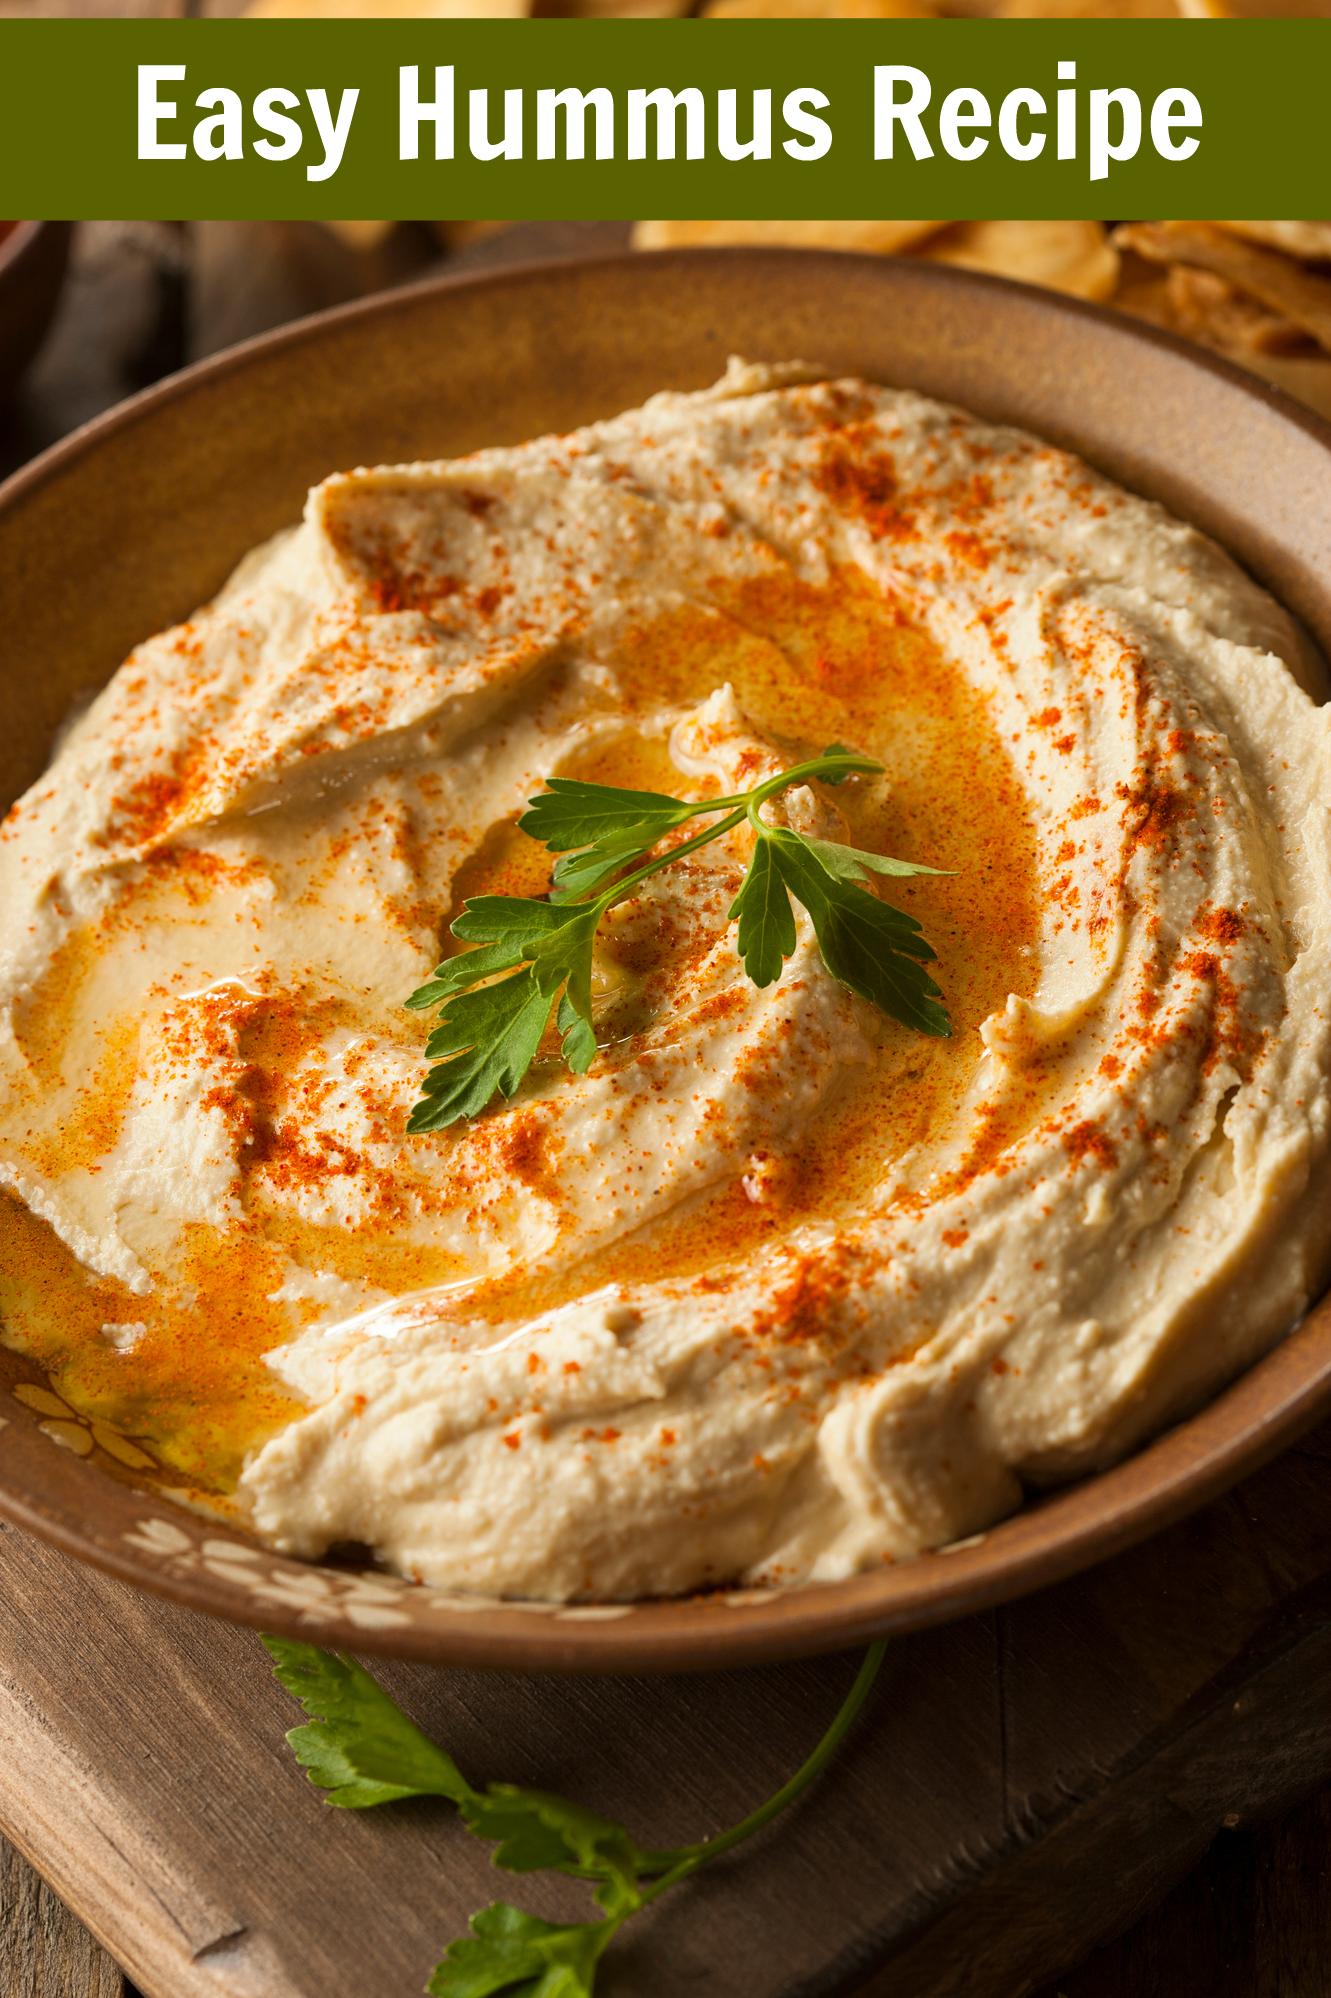  Get ready for some magic with this creamy hummus.